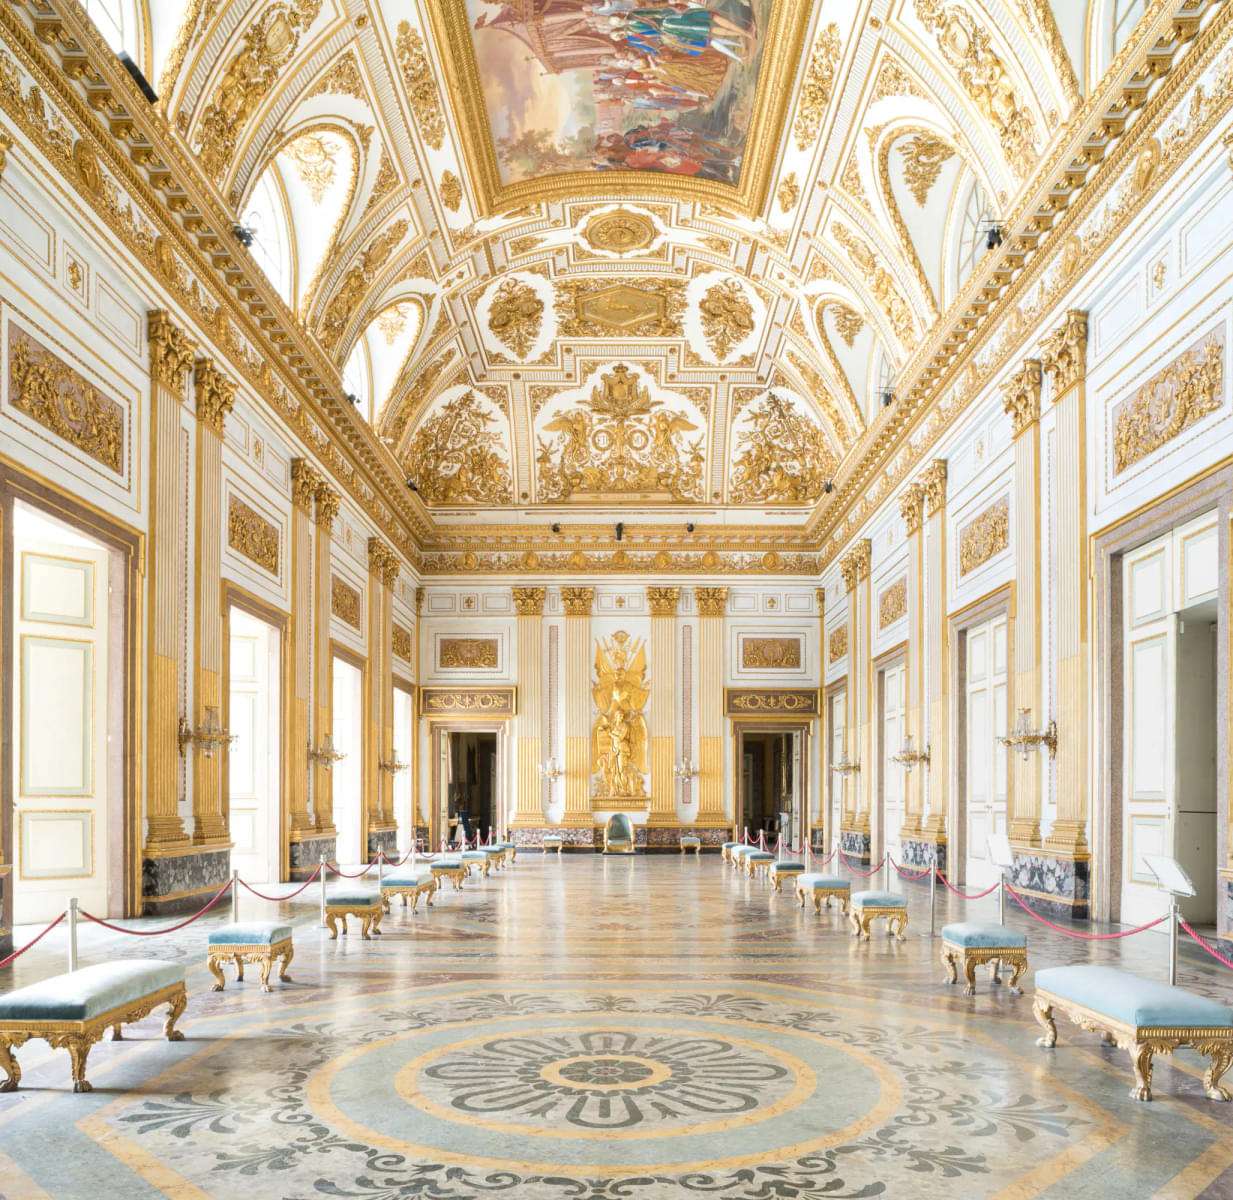 Marvel at the beautiful portraits of the rulers and see the throne of all the kings of Naples in the throne room of the palace